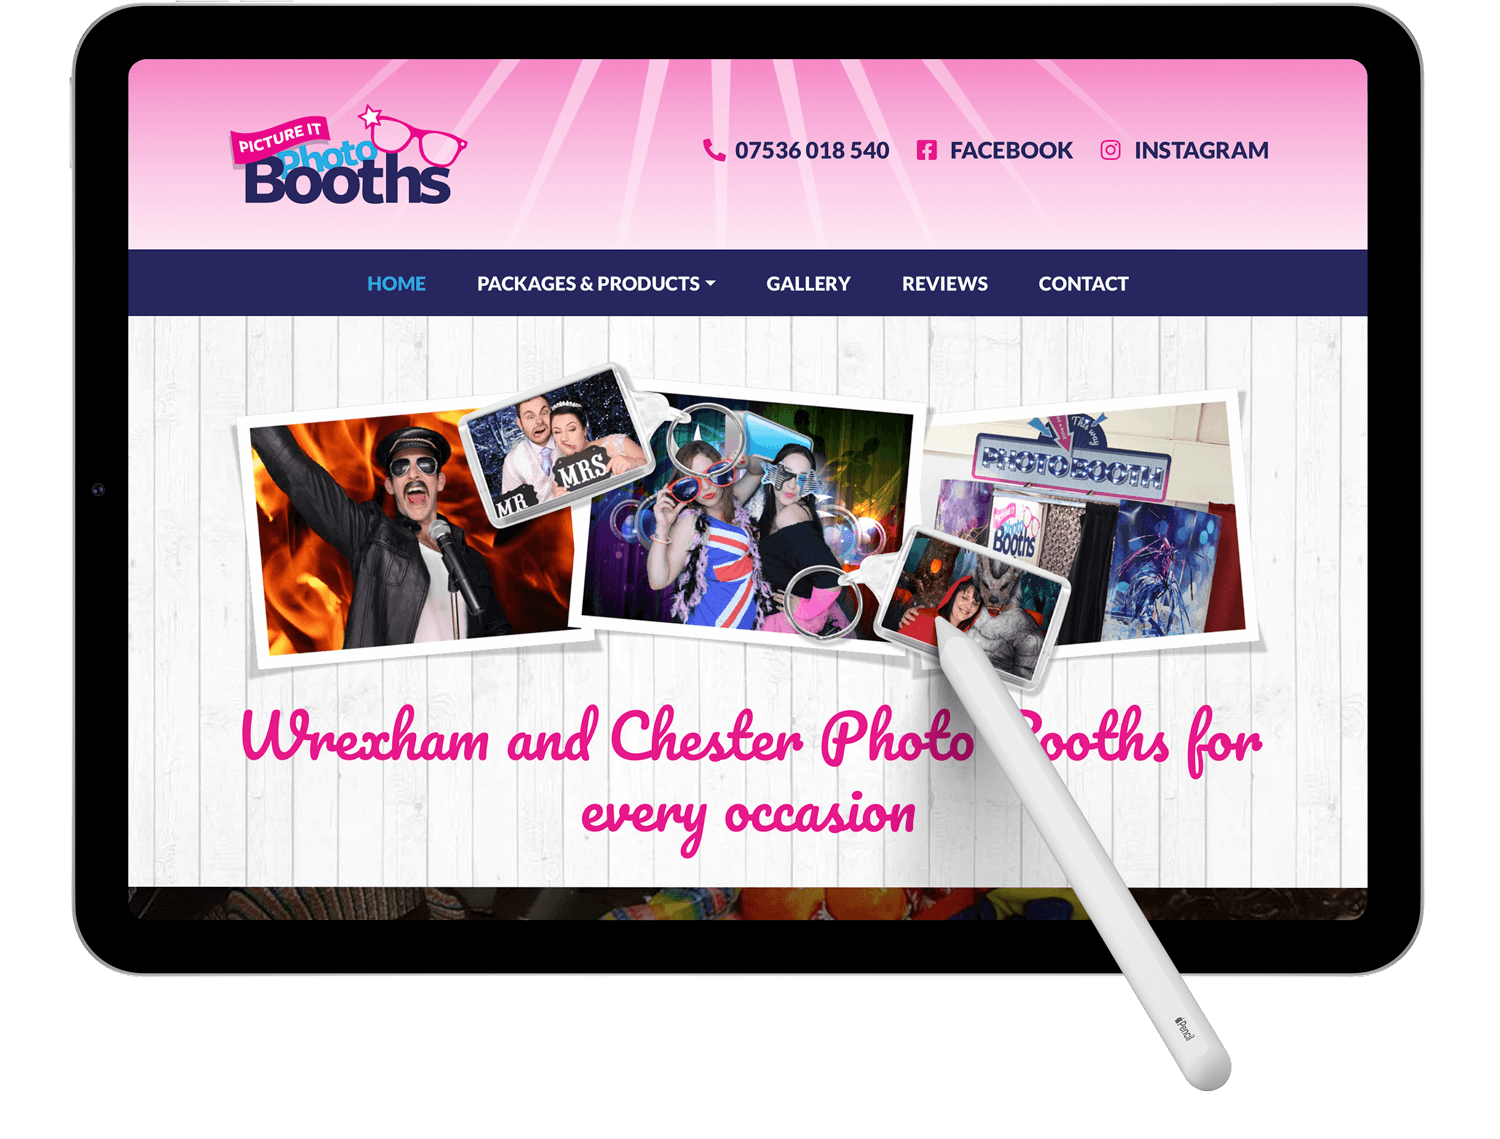 Picture it photo booths website